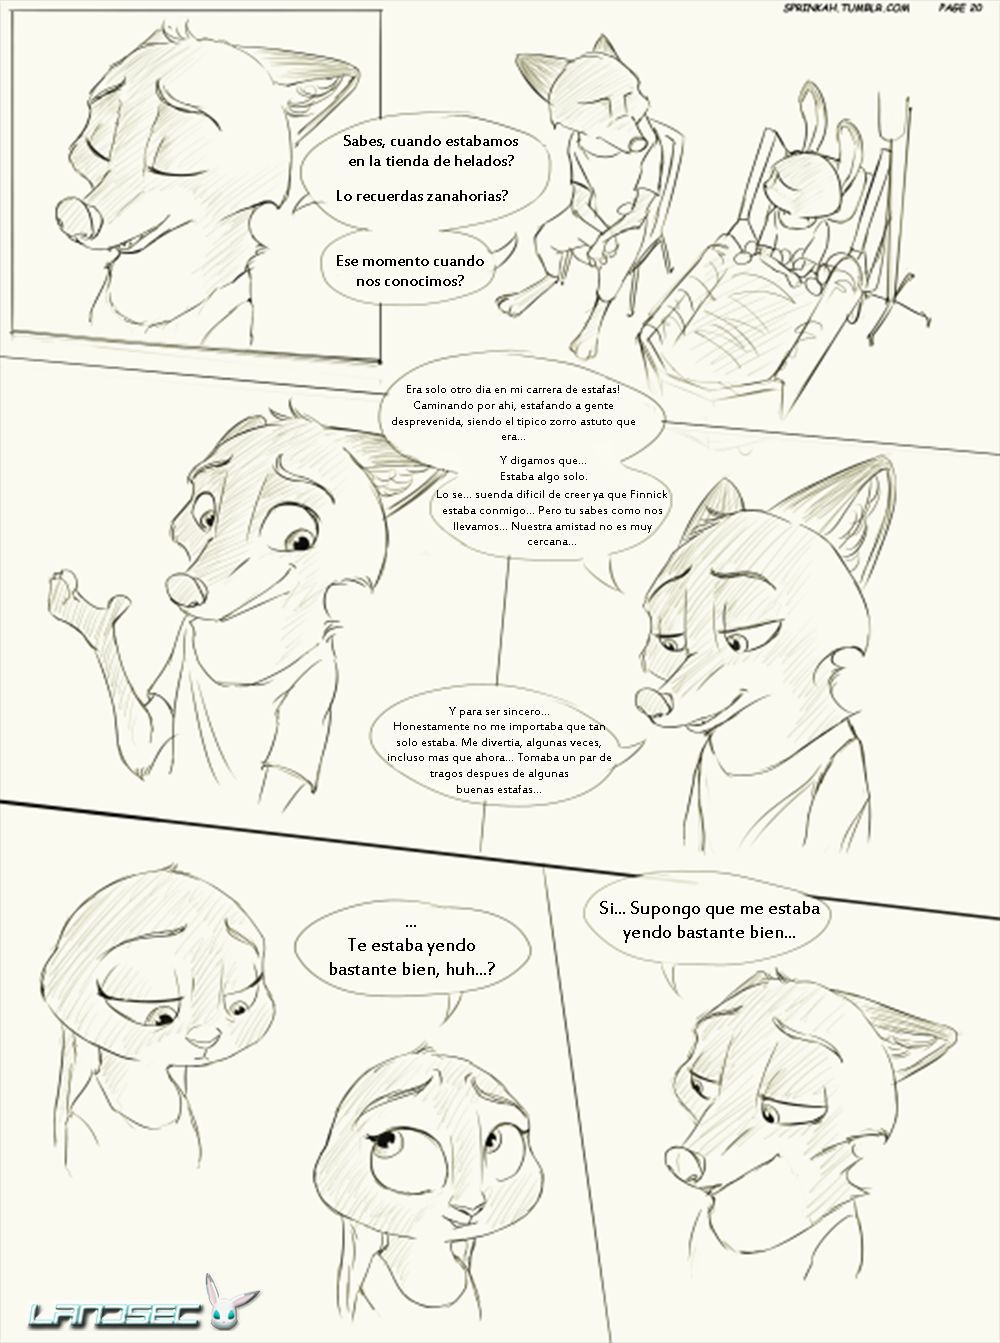 [Sprinkah] This is what true love looks like (Zootopia) (Spanish) (On Going) [Landsec] http://sprinkah.tumblr.com/ 31